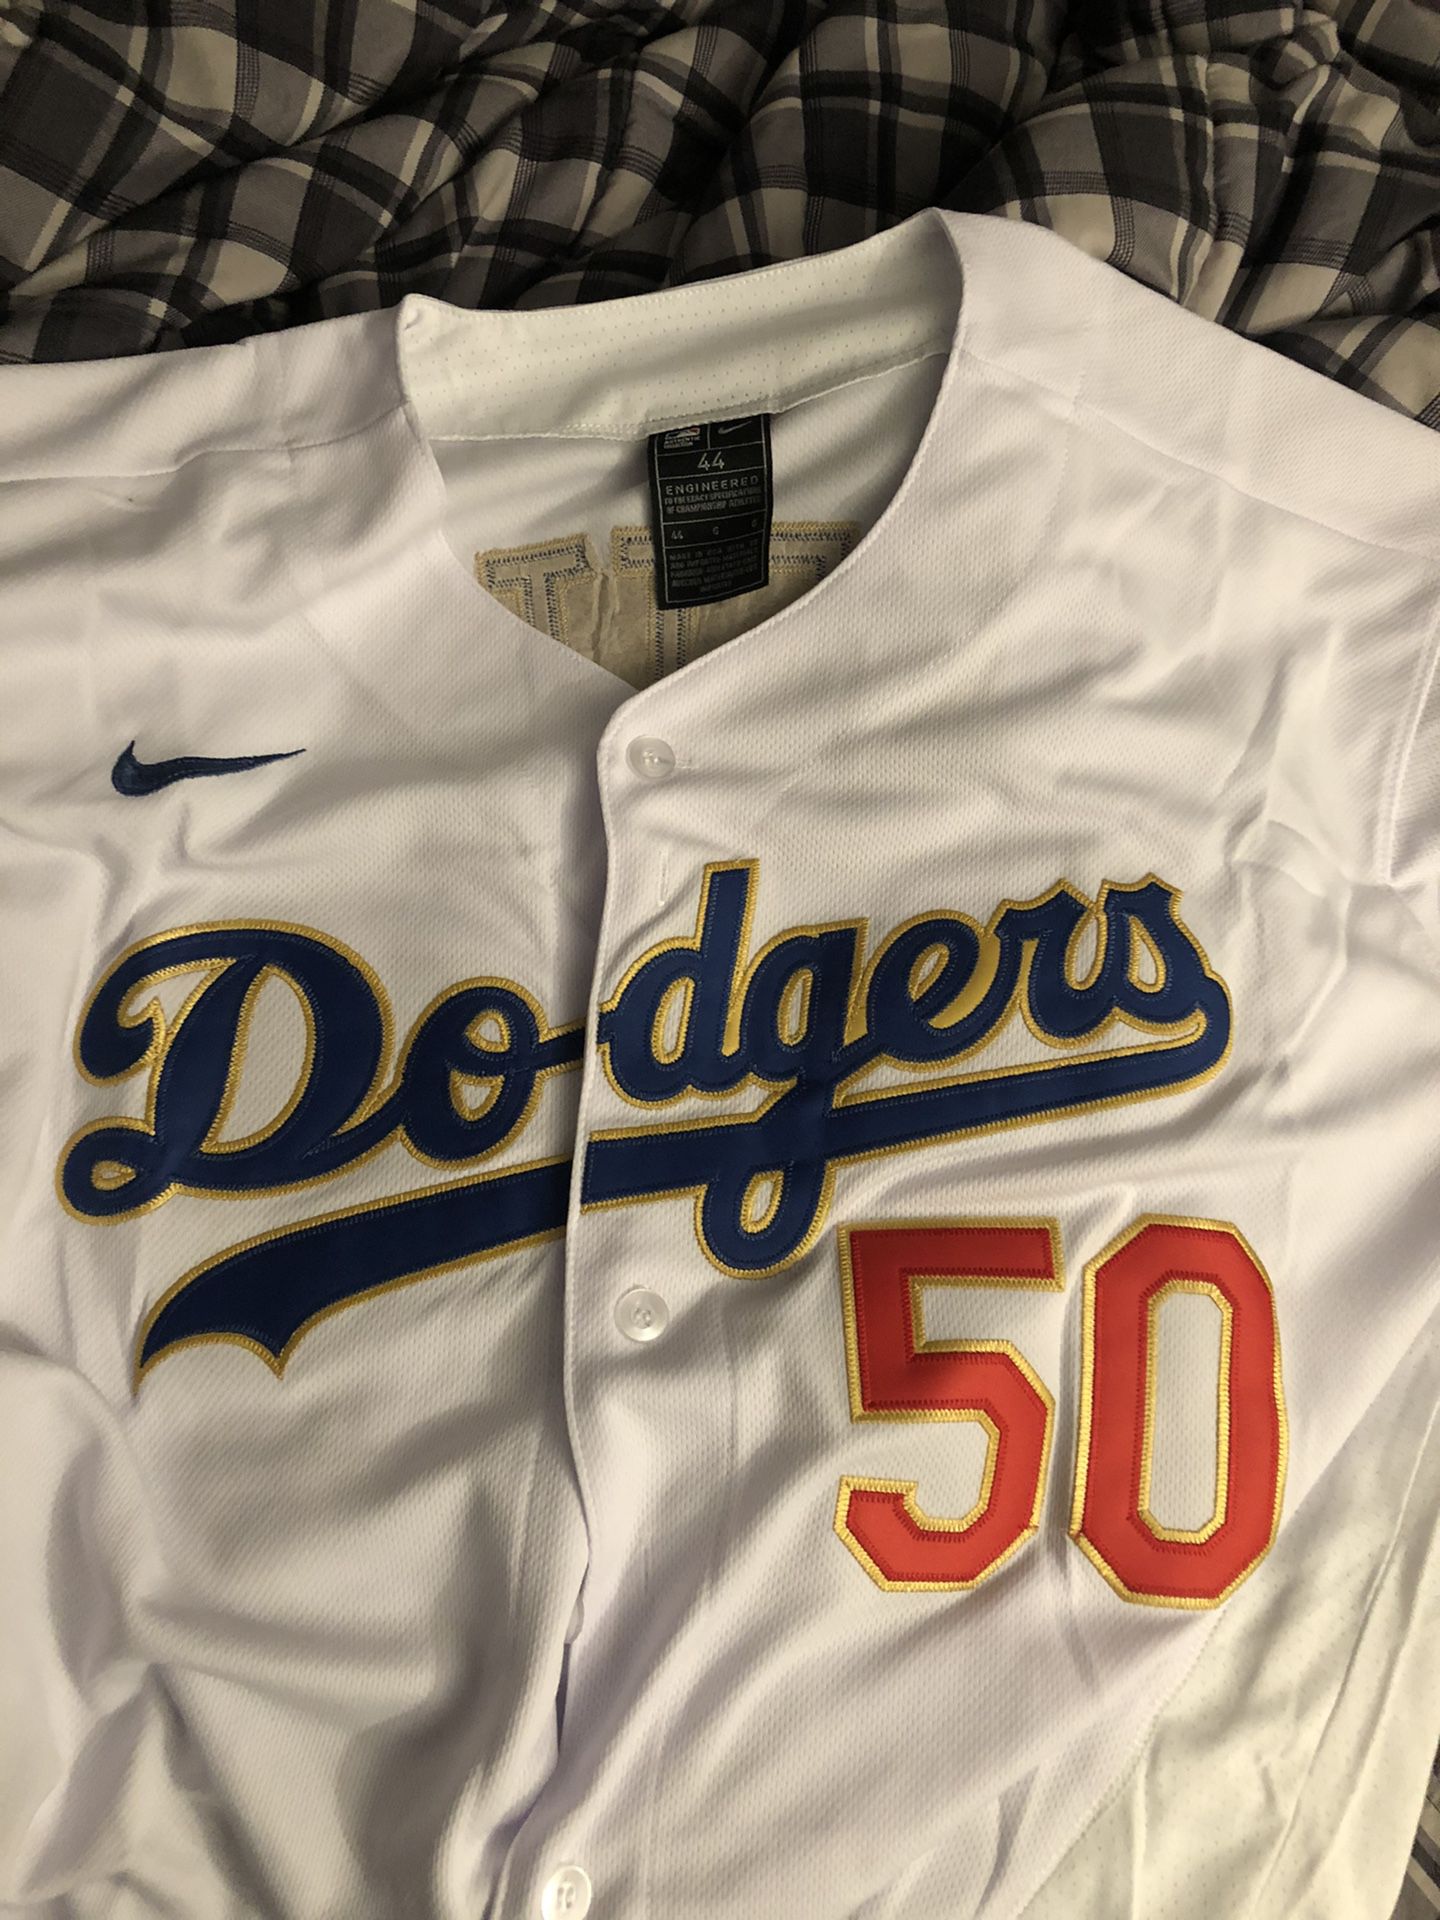 world series dodgers mookie betts jersey large